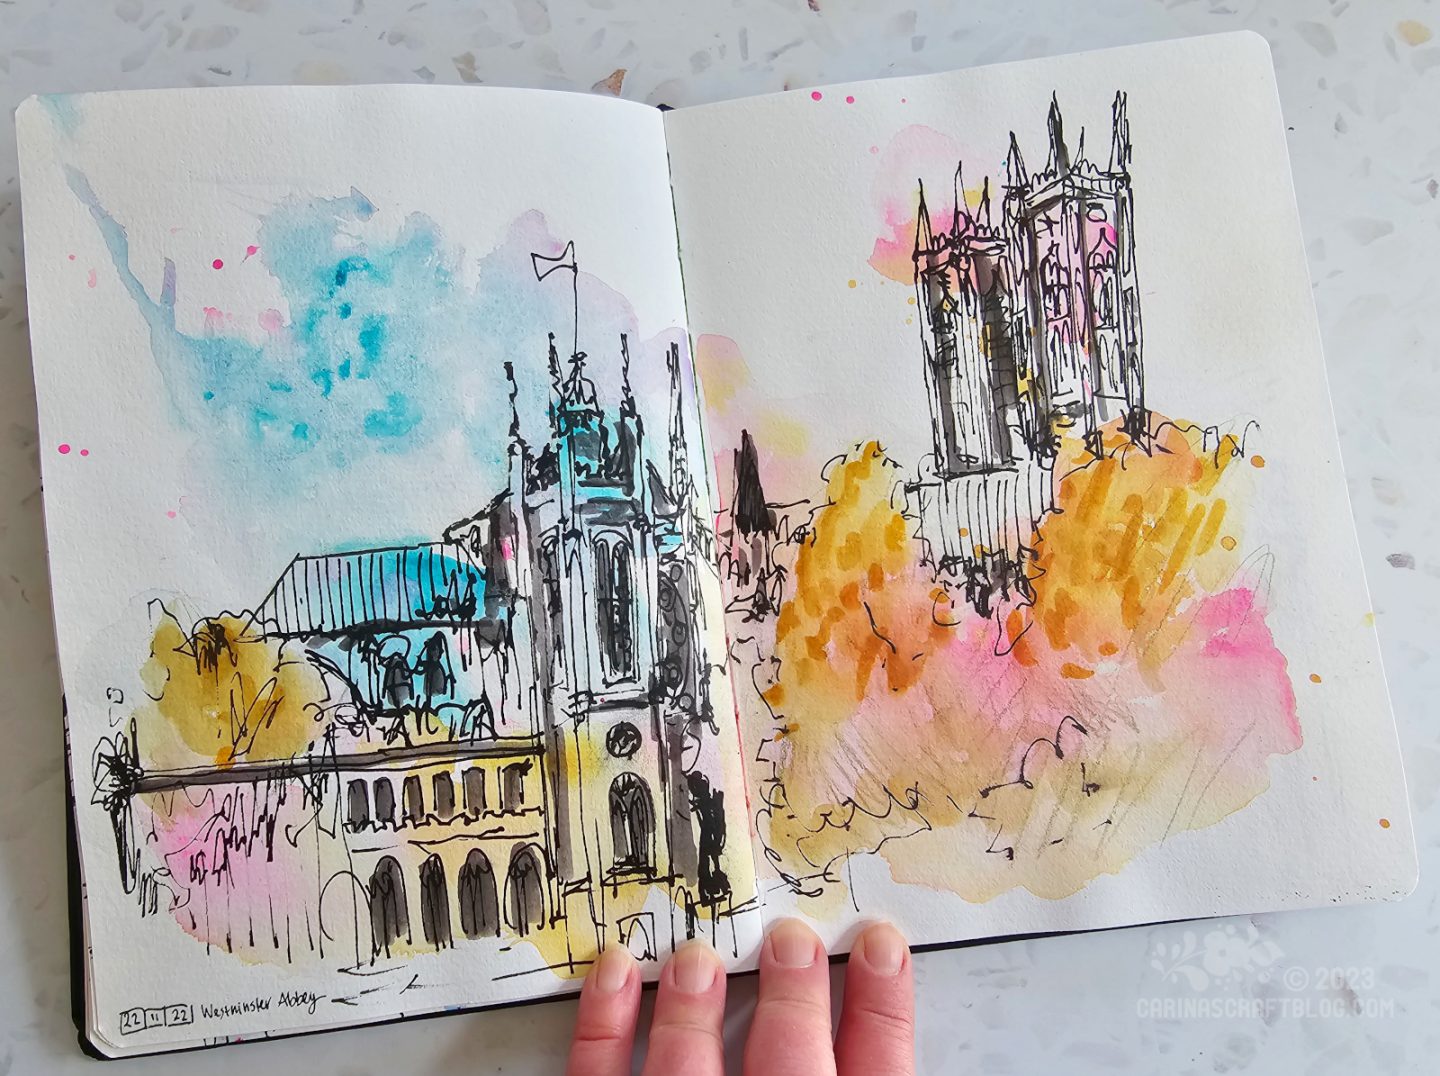 Photo of an open spread in a sketchbook. The spread shows a sketch of Westminster Abbey in London, drawn over pink, yellow and blue watercolour splashes.